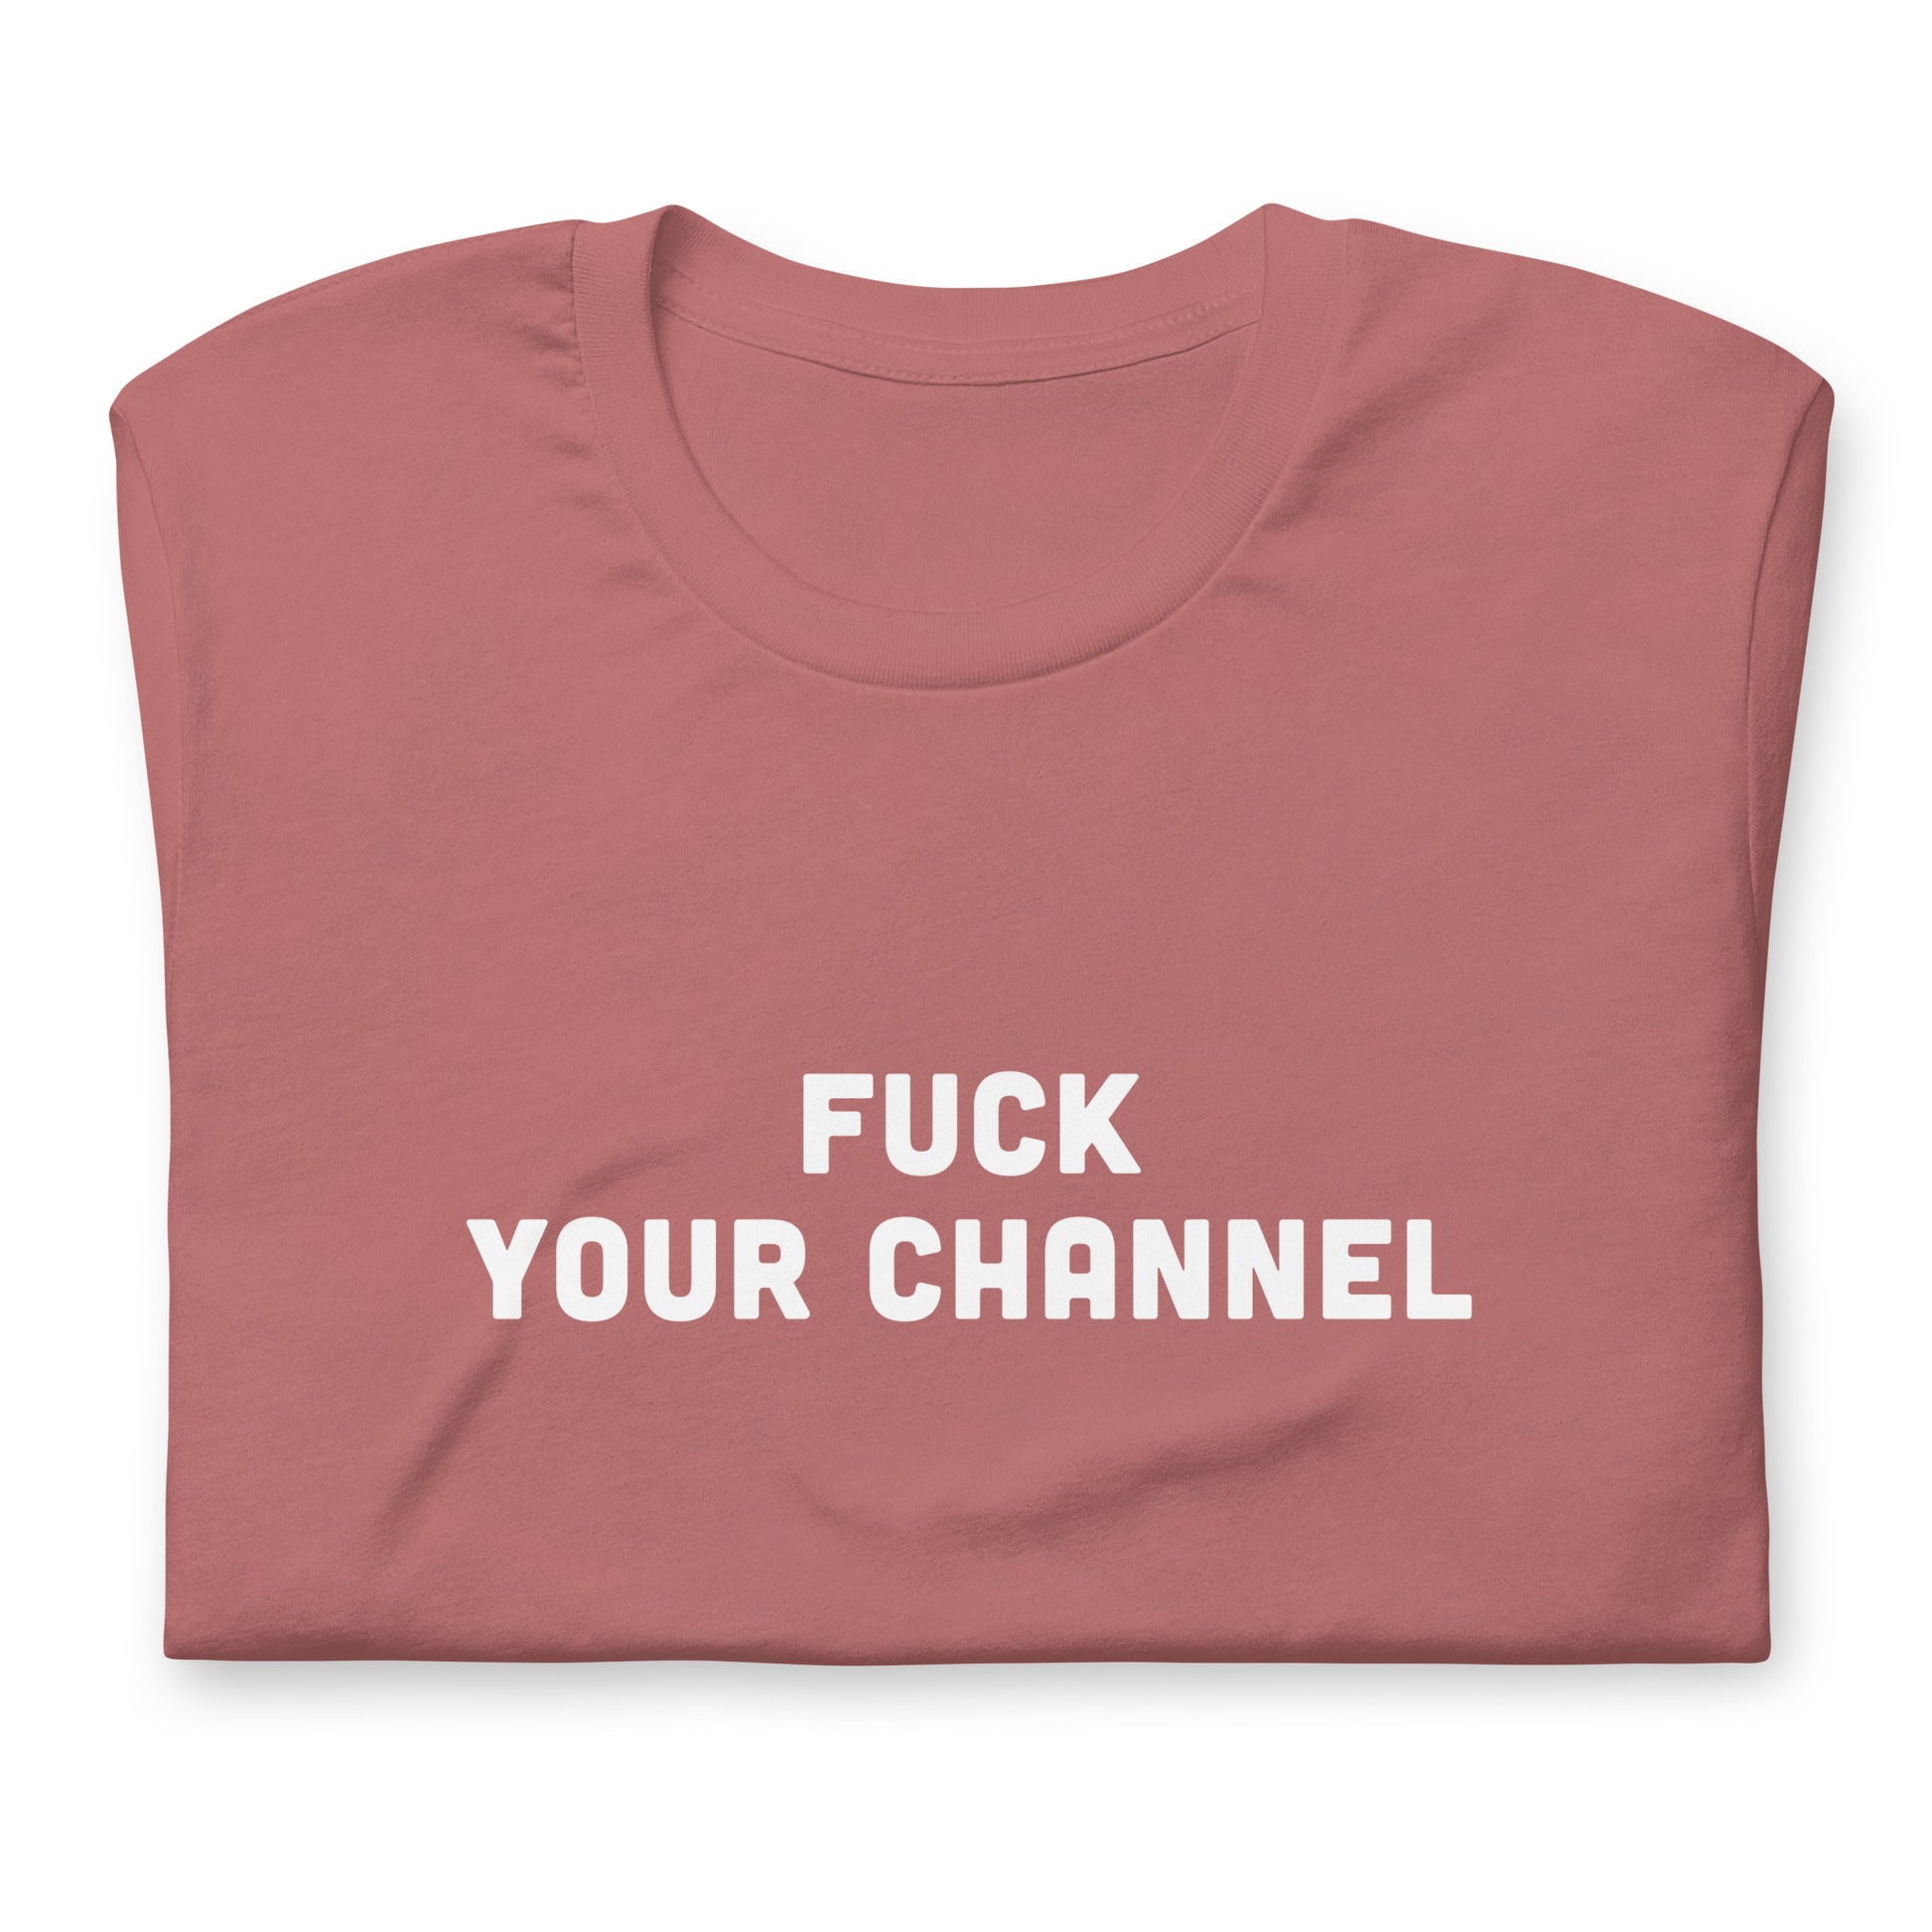 Fuck Your Channel T-Shirt Size 2XL Color Navy